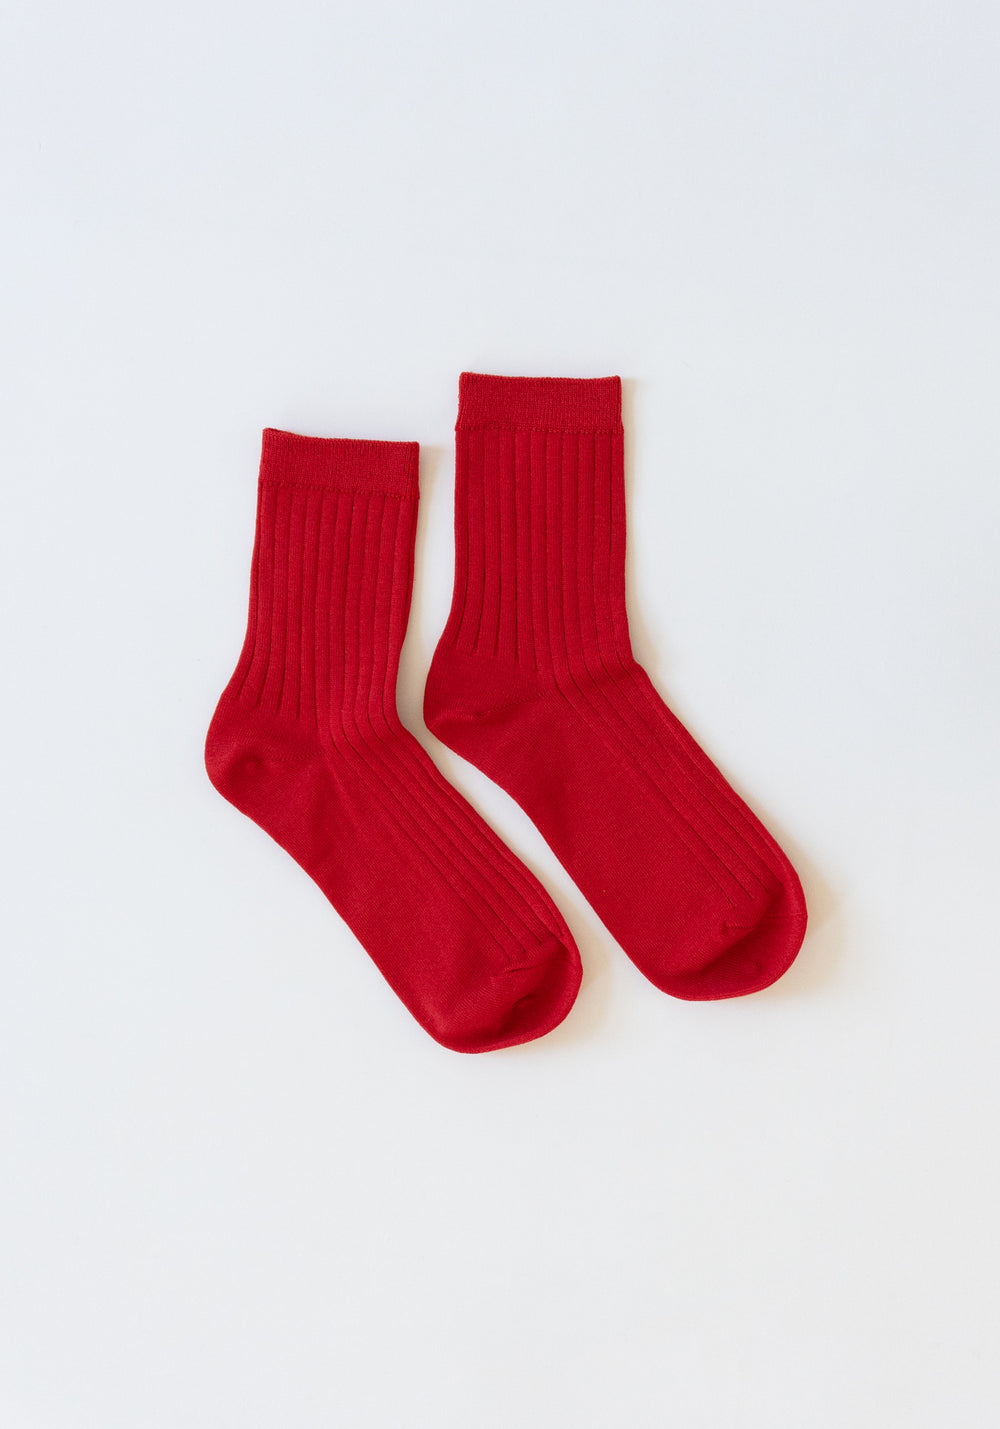 Le Bon Shoppe Her Socks in Classic Red